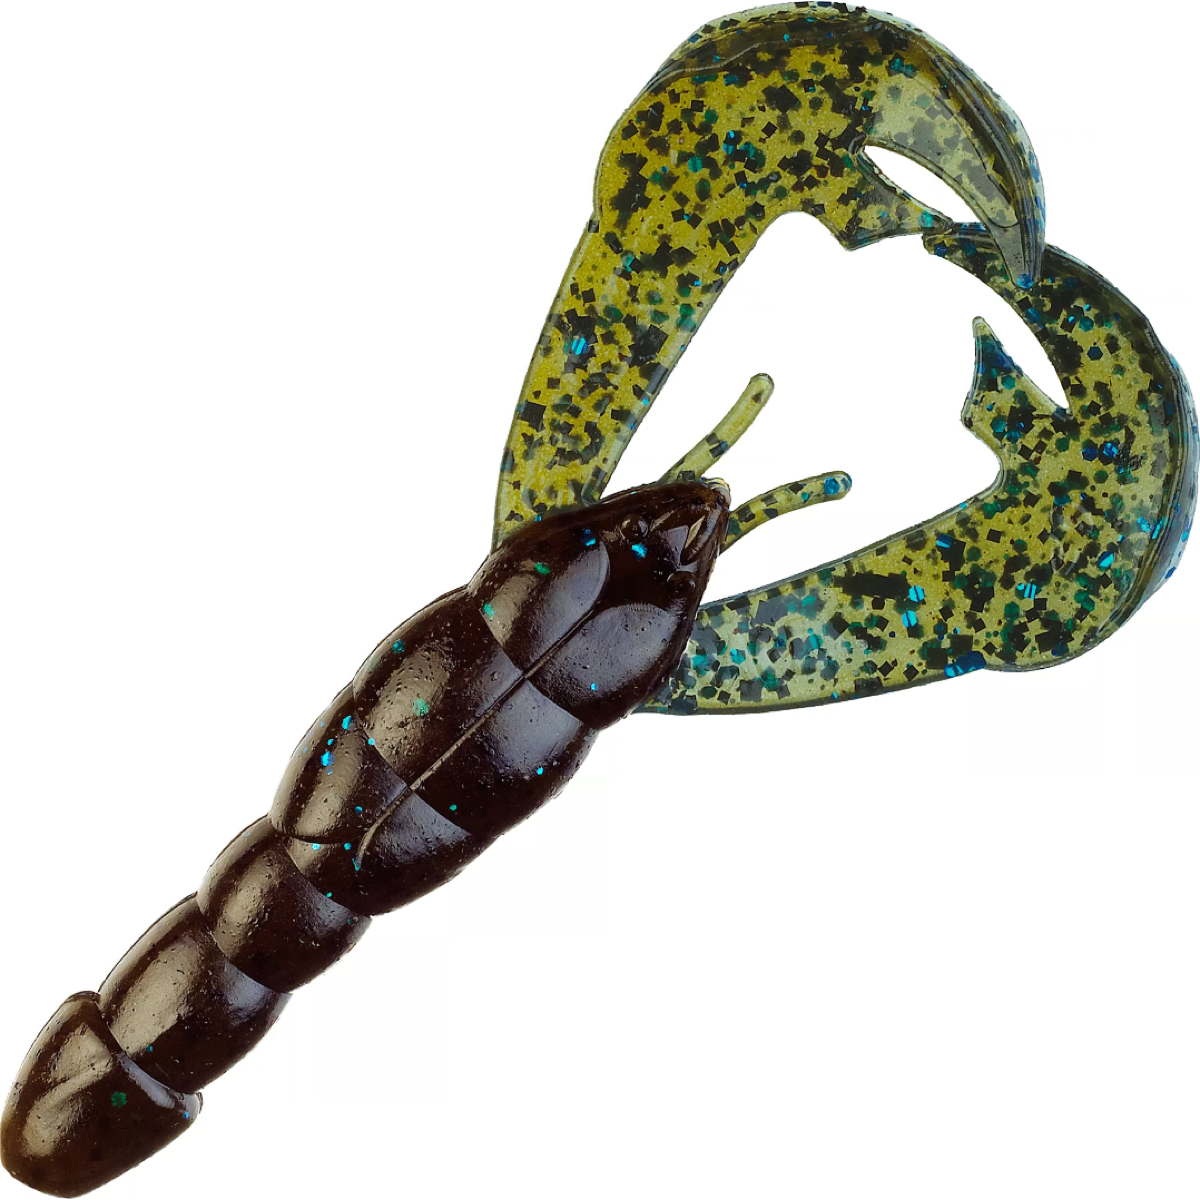 Photo of Strike King Rage Tail Craw Soft Bait for sale at United Tackle Shops.